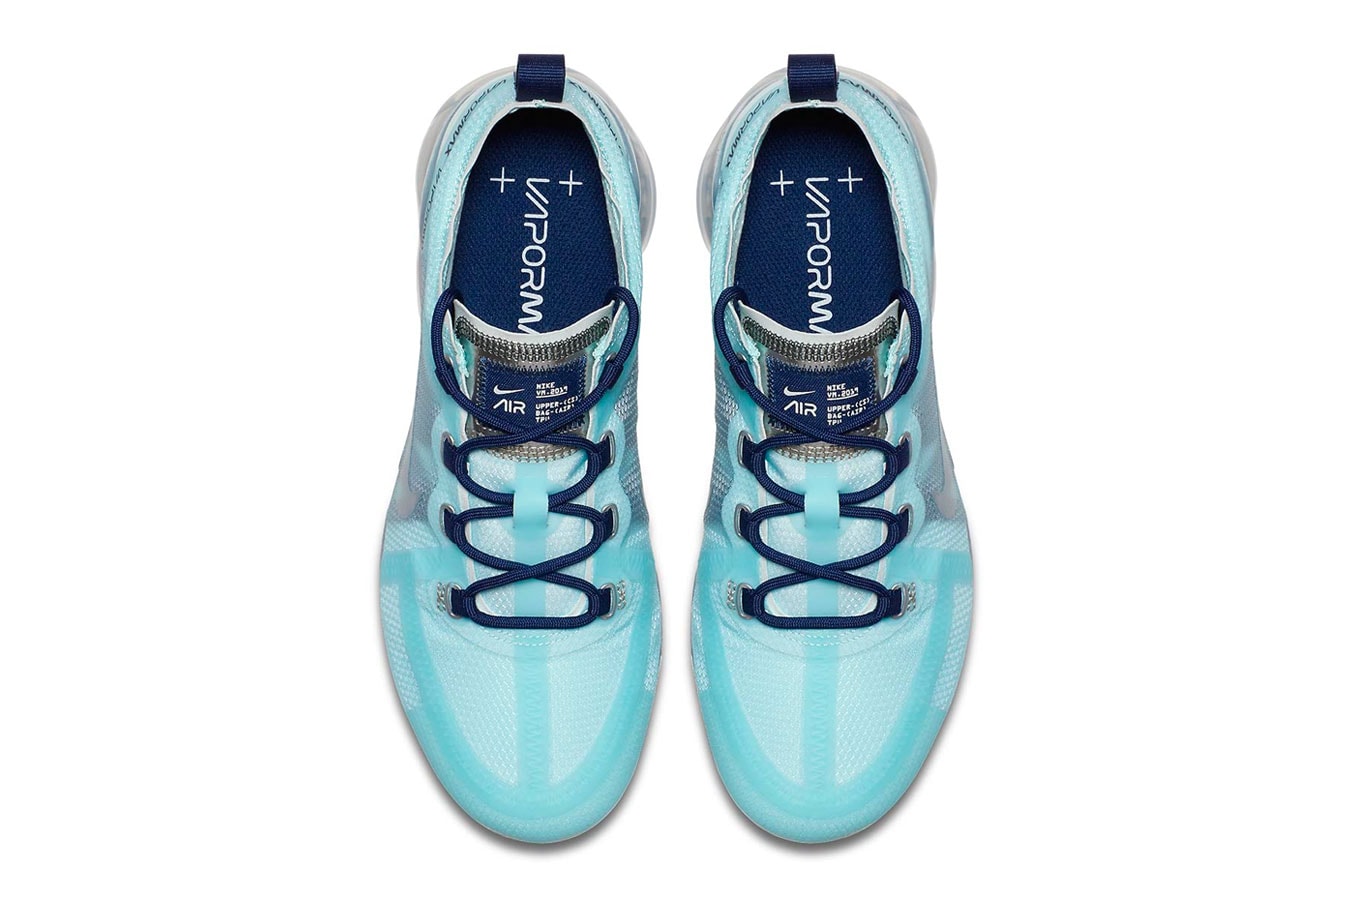  Nike Air VaporMax 2019 "Teal Tint/Blue Void" release date info price womens colorway sneaker purchase stockist nike.com Color: Teal Tint/Blue Void/Spruce Fog/Teal Tint Style Code: AR6632-300